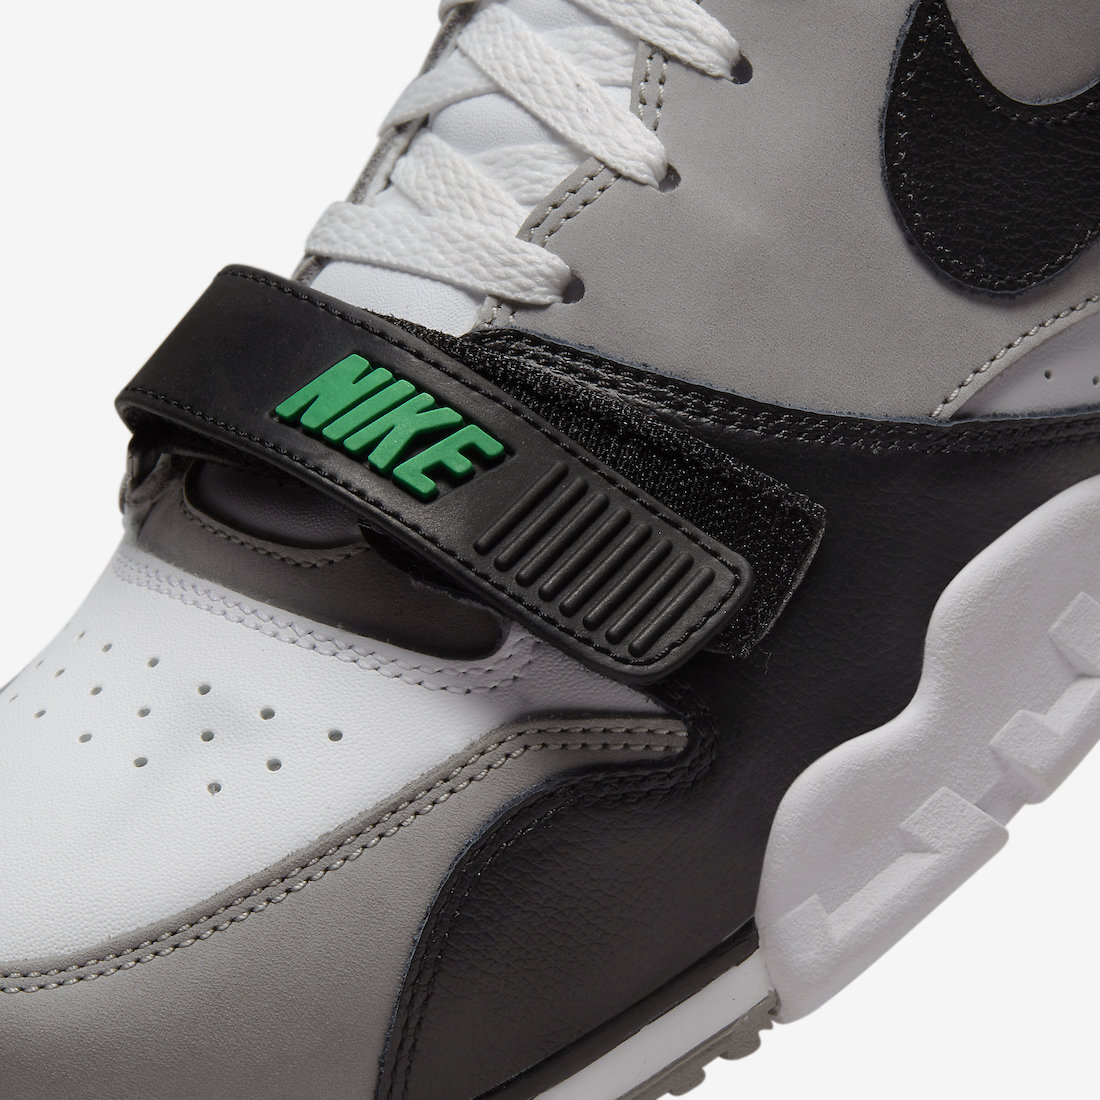 Nike Air Trainer 1 Mid Chlorophyll 2022 DM0521-100 Where to Buy